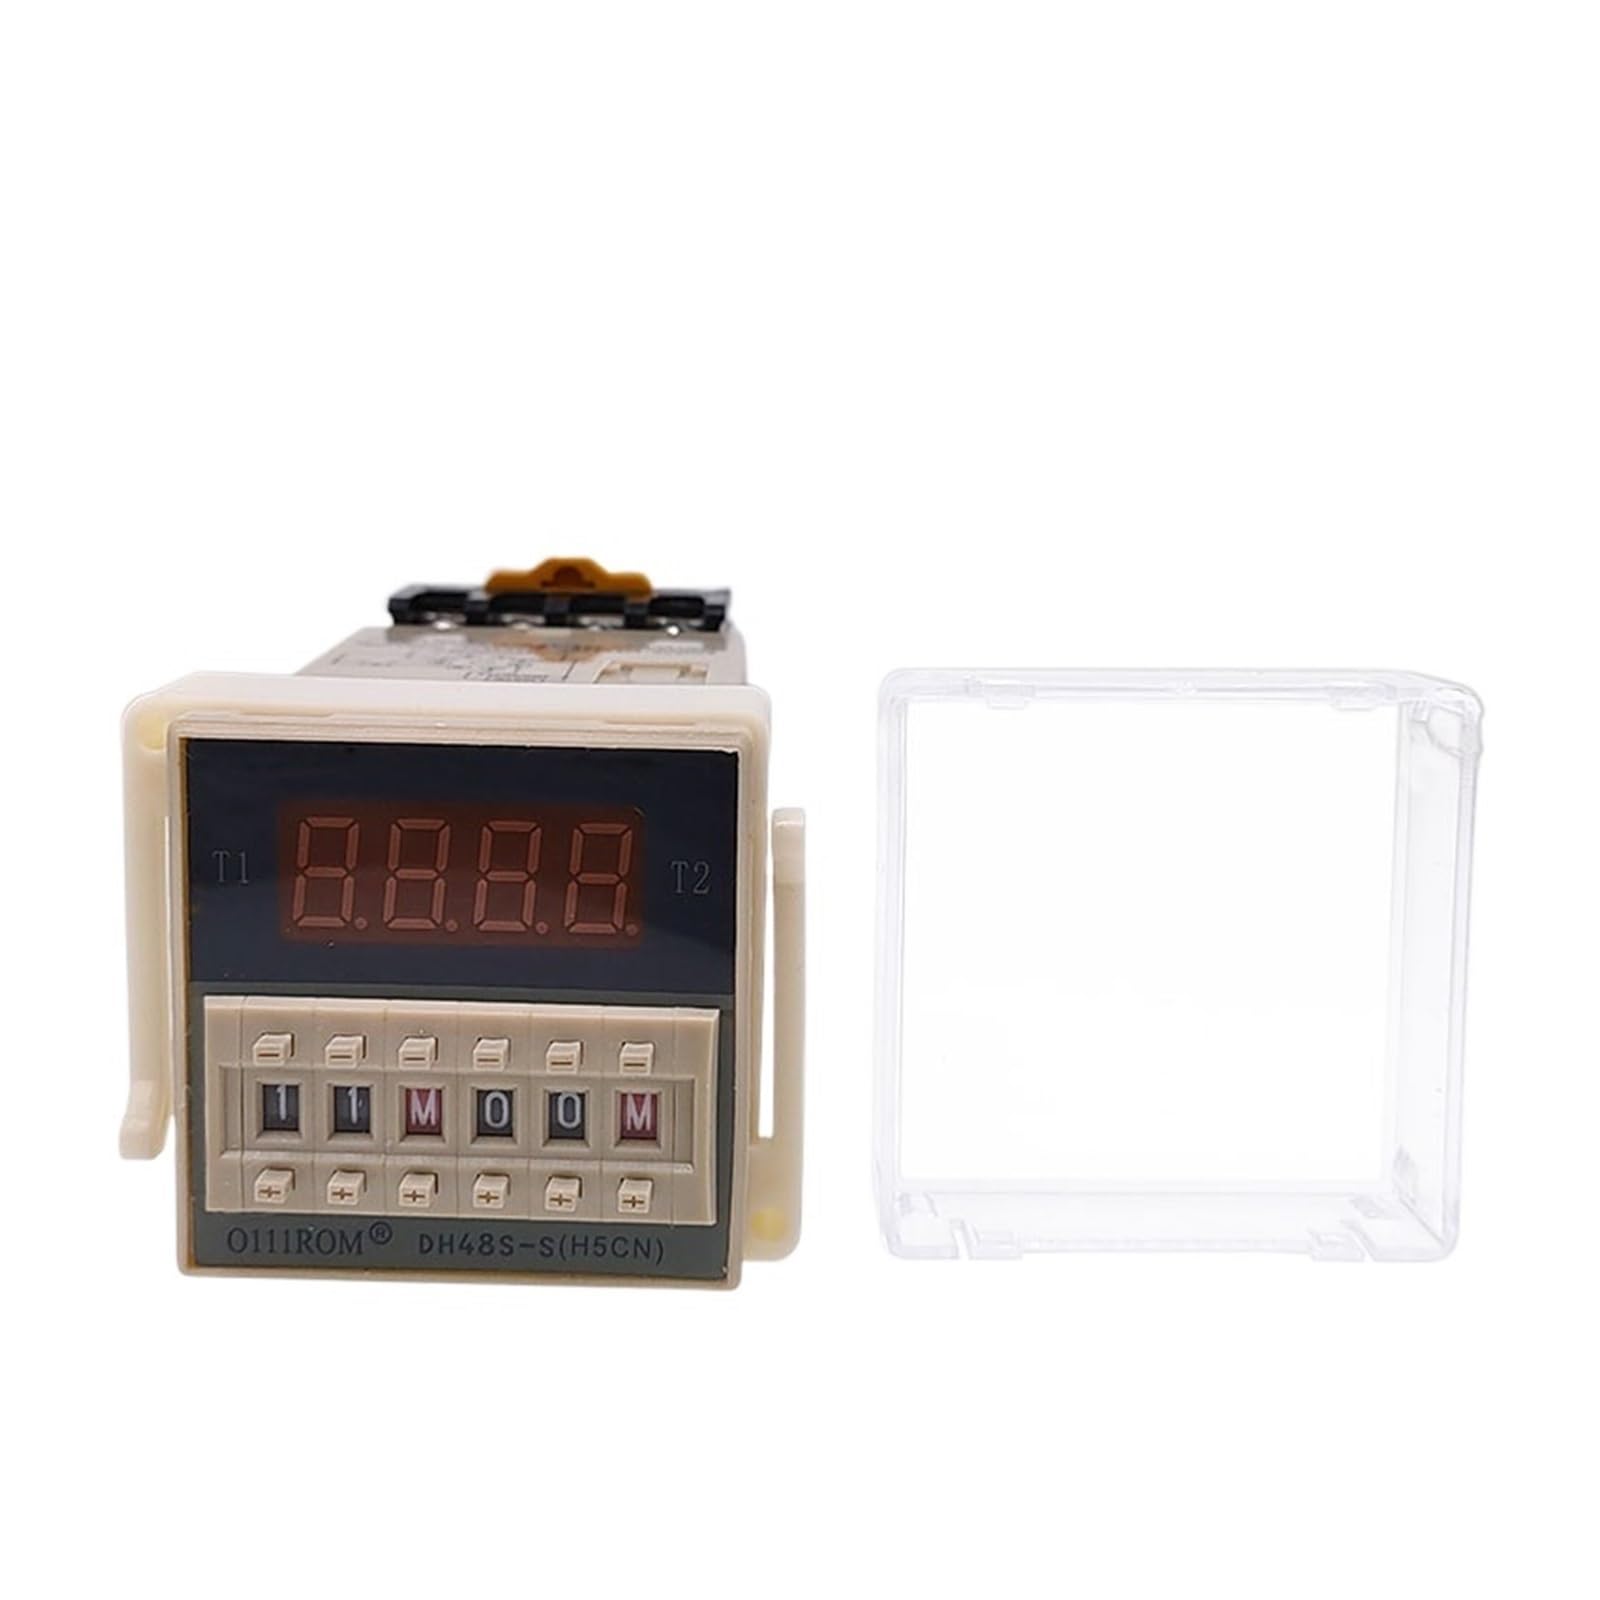 DH48S-S Digital Display Time Relay DH48S-1Z Cycle Timer Control and Delay Device With Base DH48S-2Z BIANMTSW(DH48S-1Z 220V) von BIANMTSW